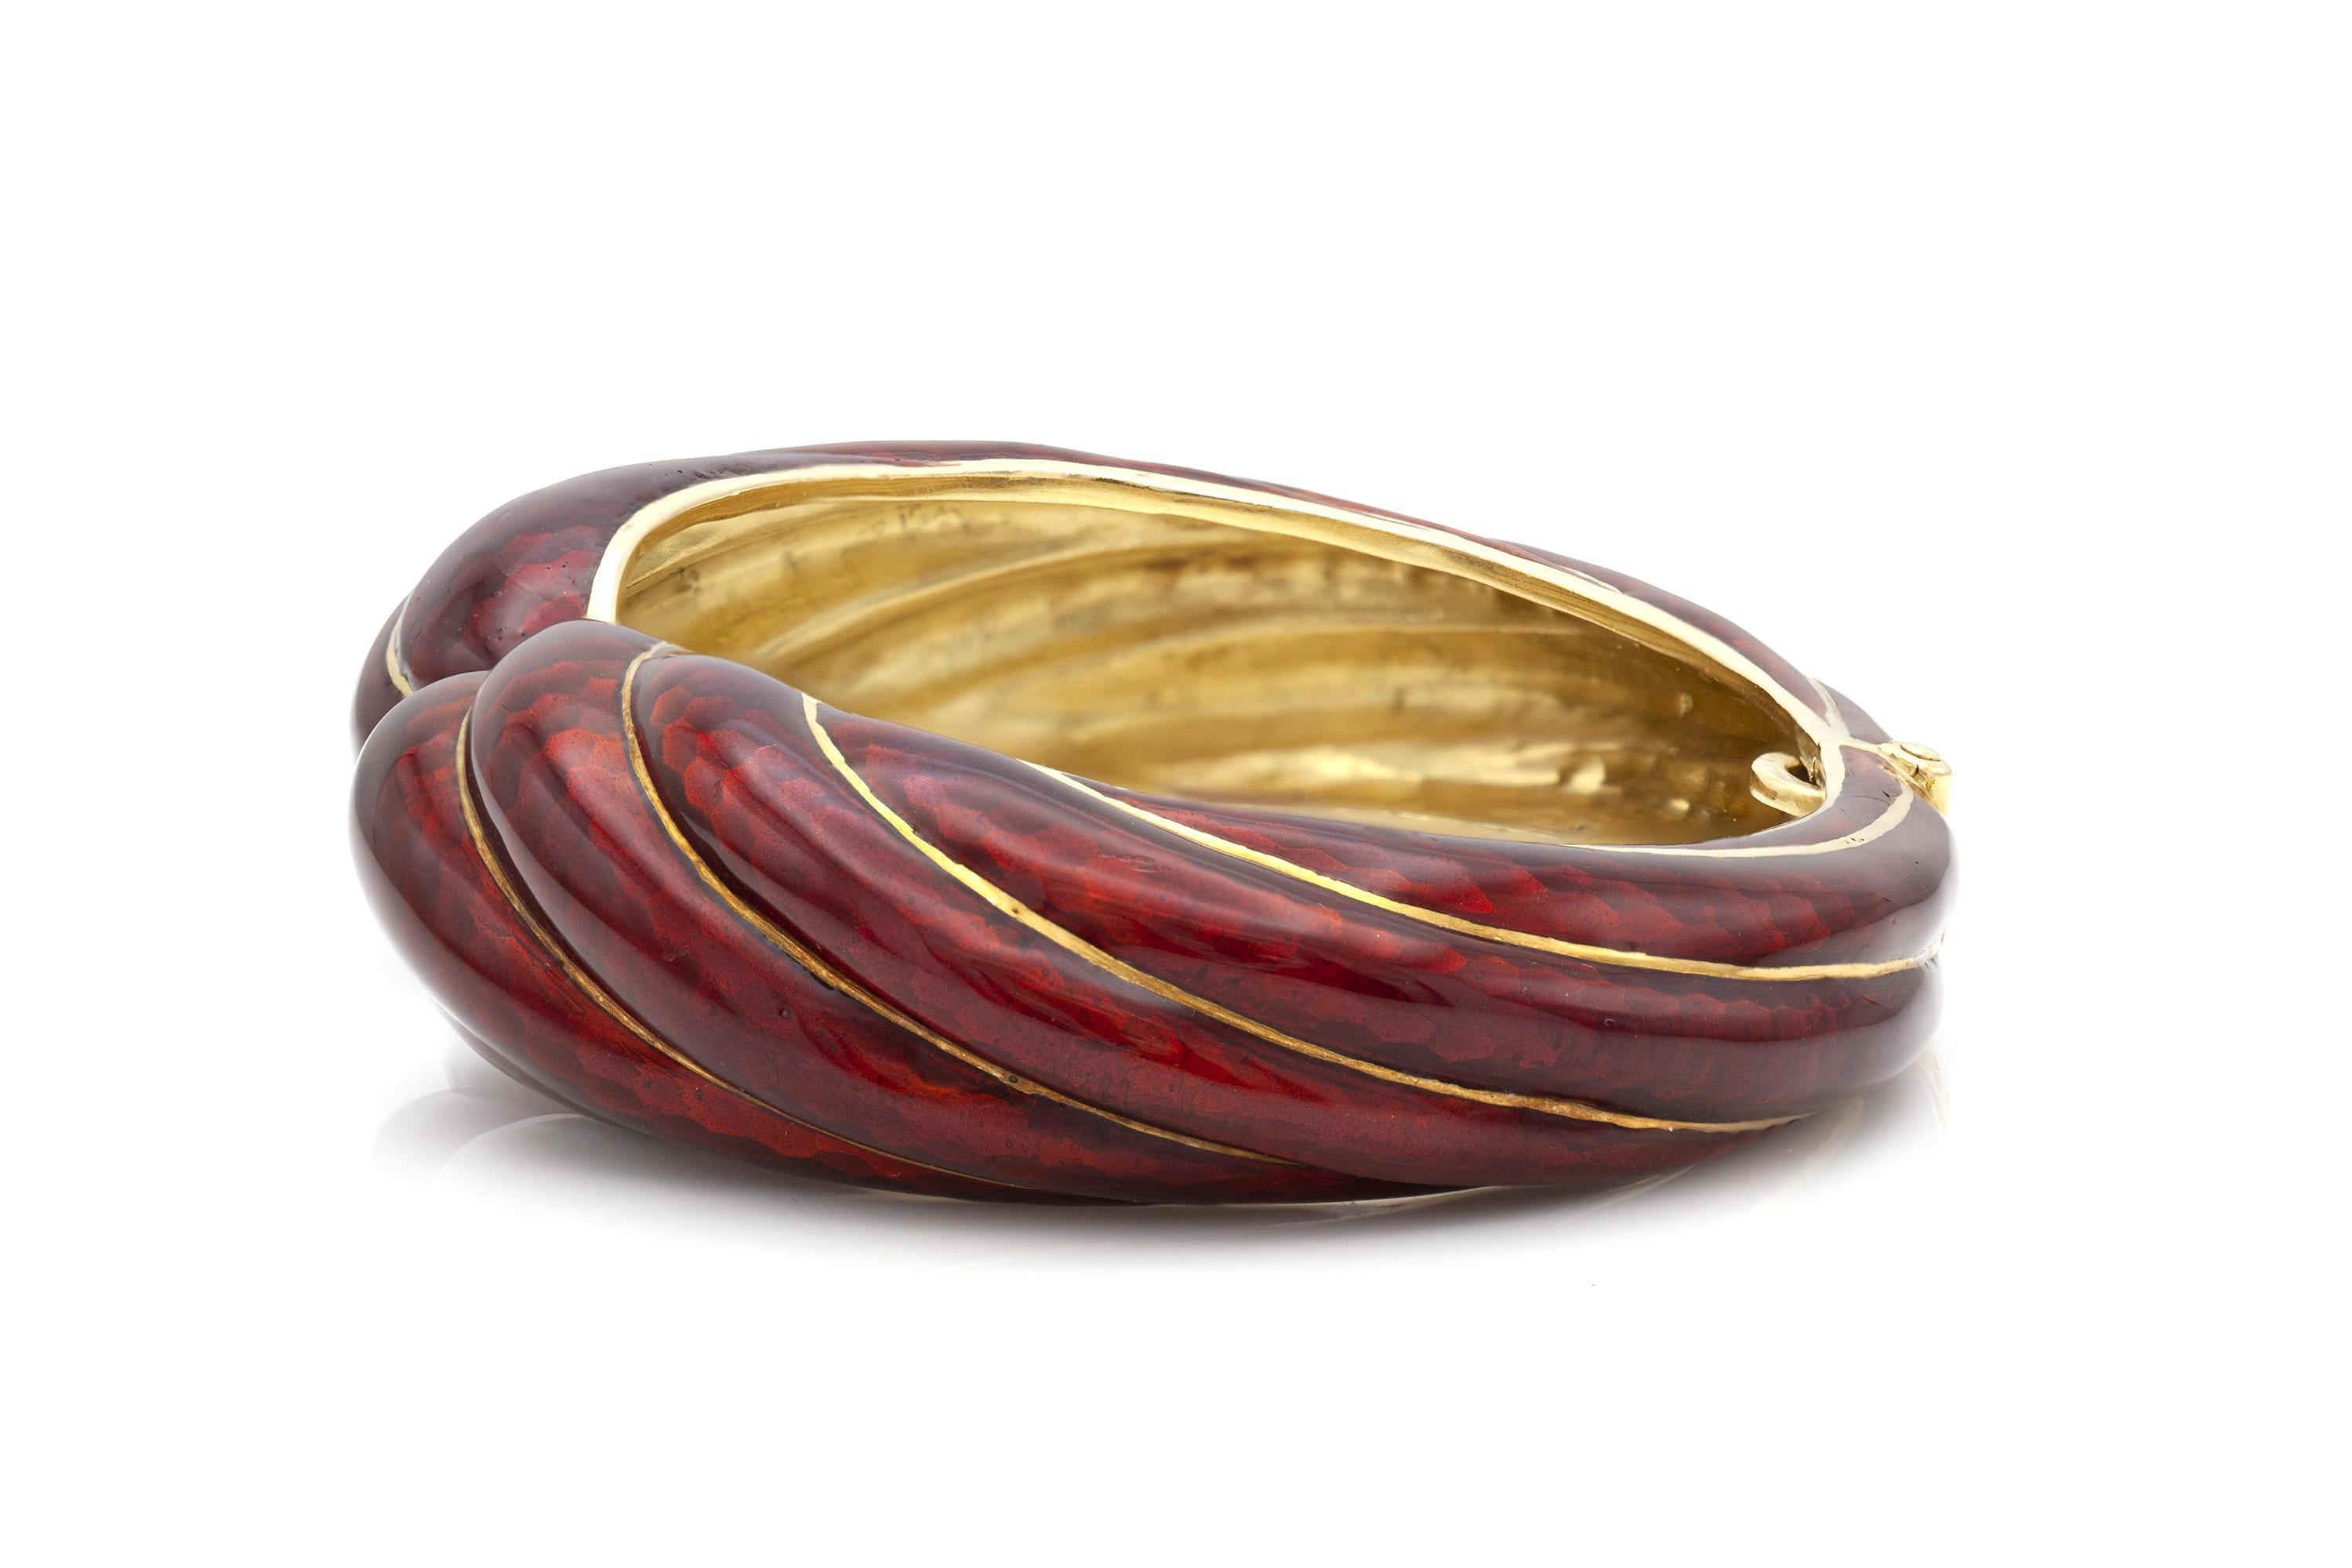 Finely crafted in 18k yellow gold with red enamel.
Signed by David Webb
Circa 1960s
Size 6 inches